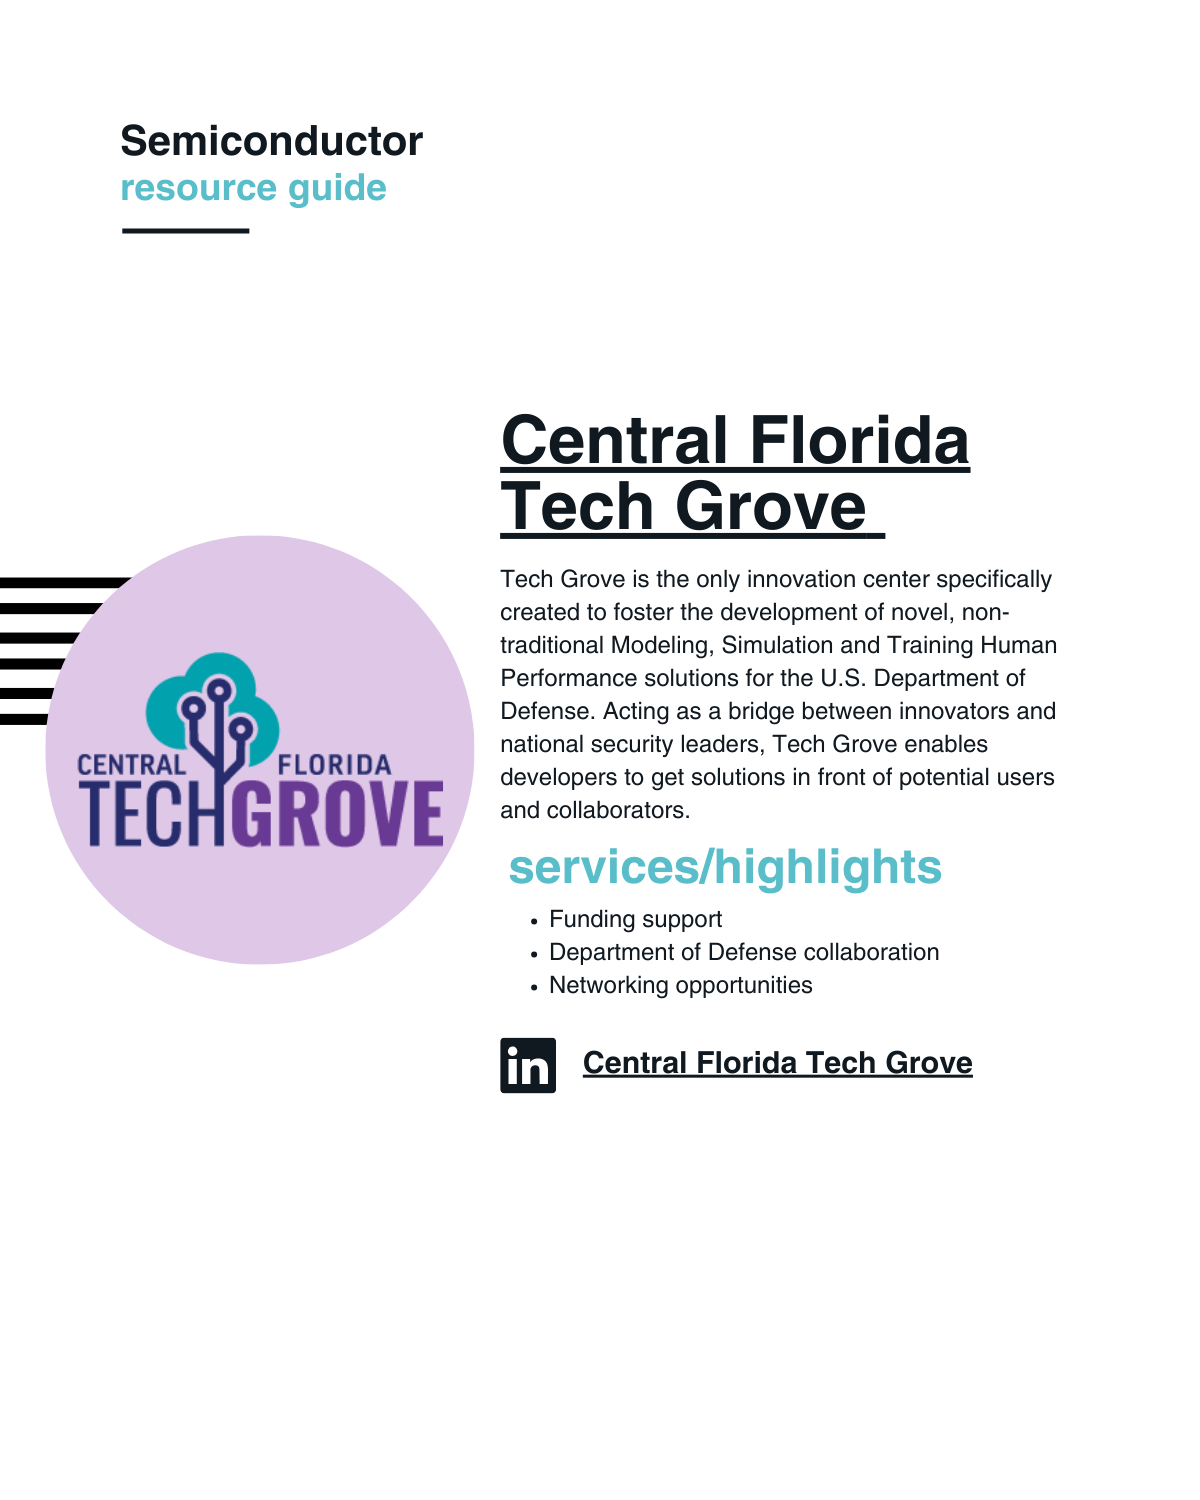 Tech Grove is the only innovation center specifically created to foster the development of novel, non-traditional Modeling, Simulation and Training Human Performance solutions for the U.S. Department of Defense. Acting as a bridge between innovators and national security leaders, Tech Grove enables developers to get solutions in front of potential users and collaborators.